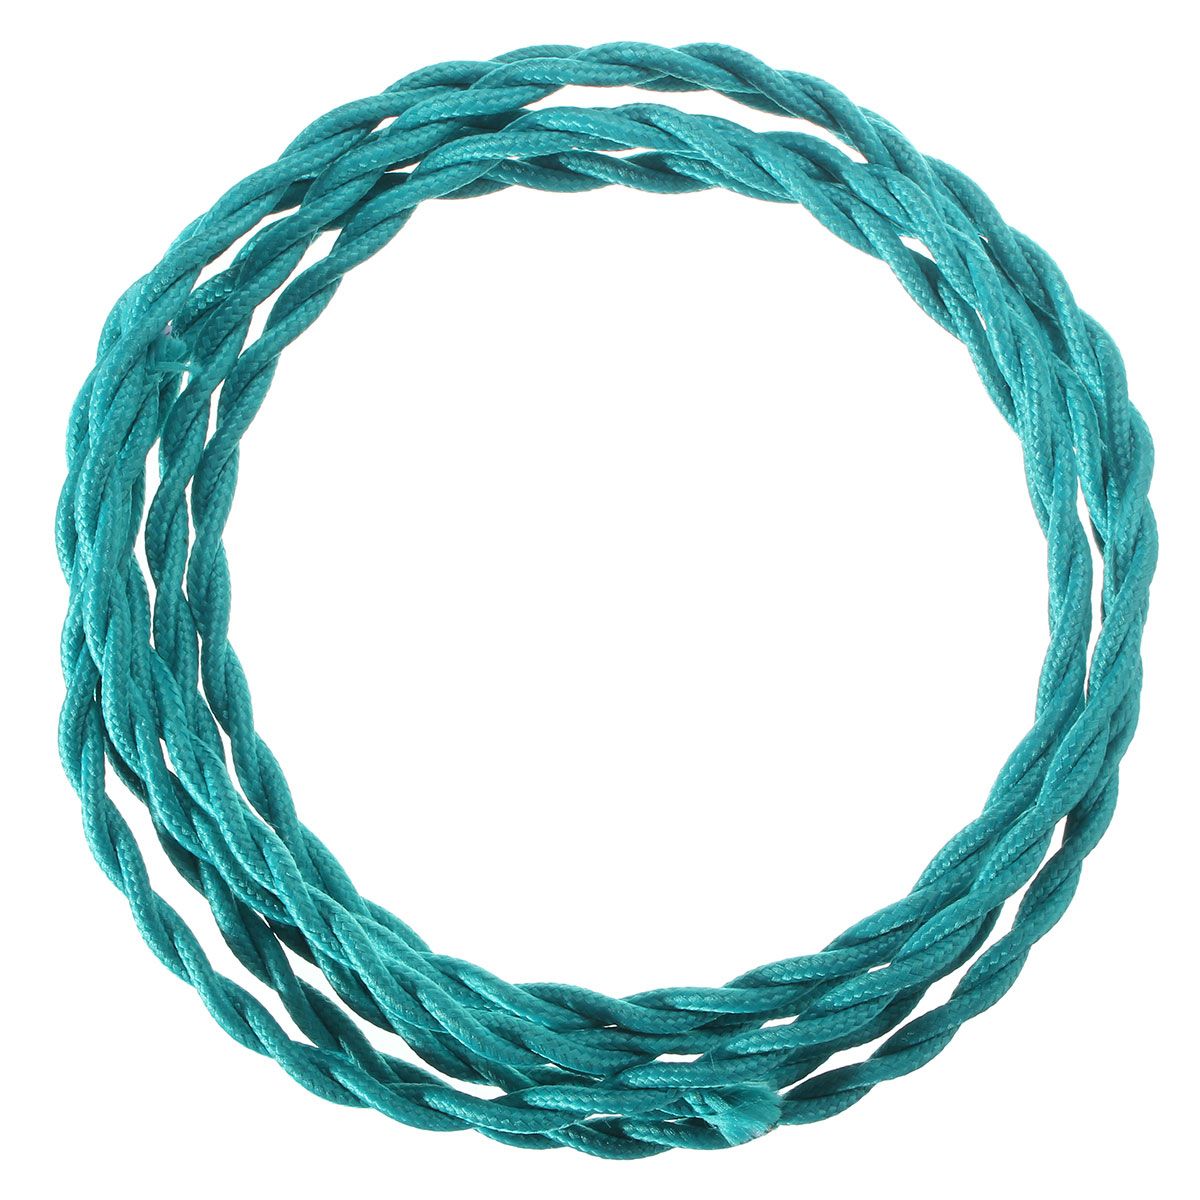 3M-Vintage-075MM-2-Core-Twist-Braided-Fabric-Cable-Wire-Electric-Cord-For-Pendant-Light-1431163